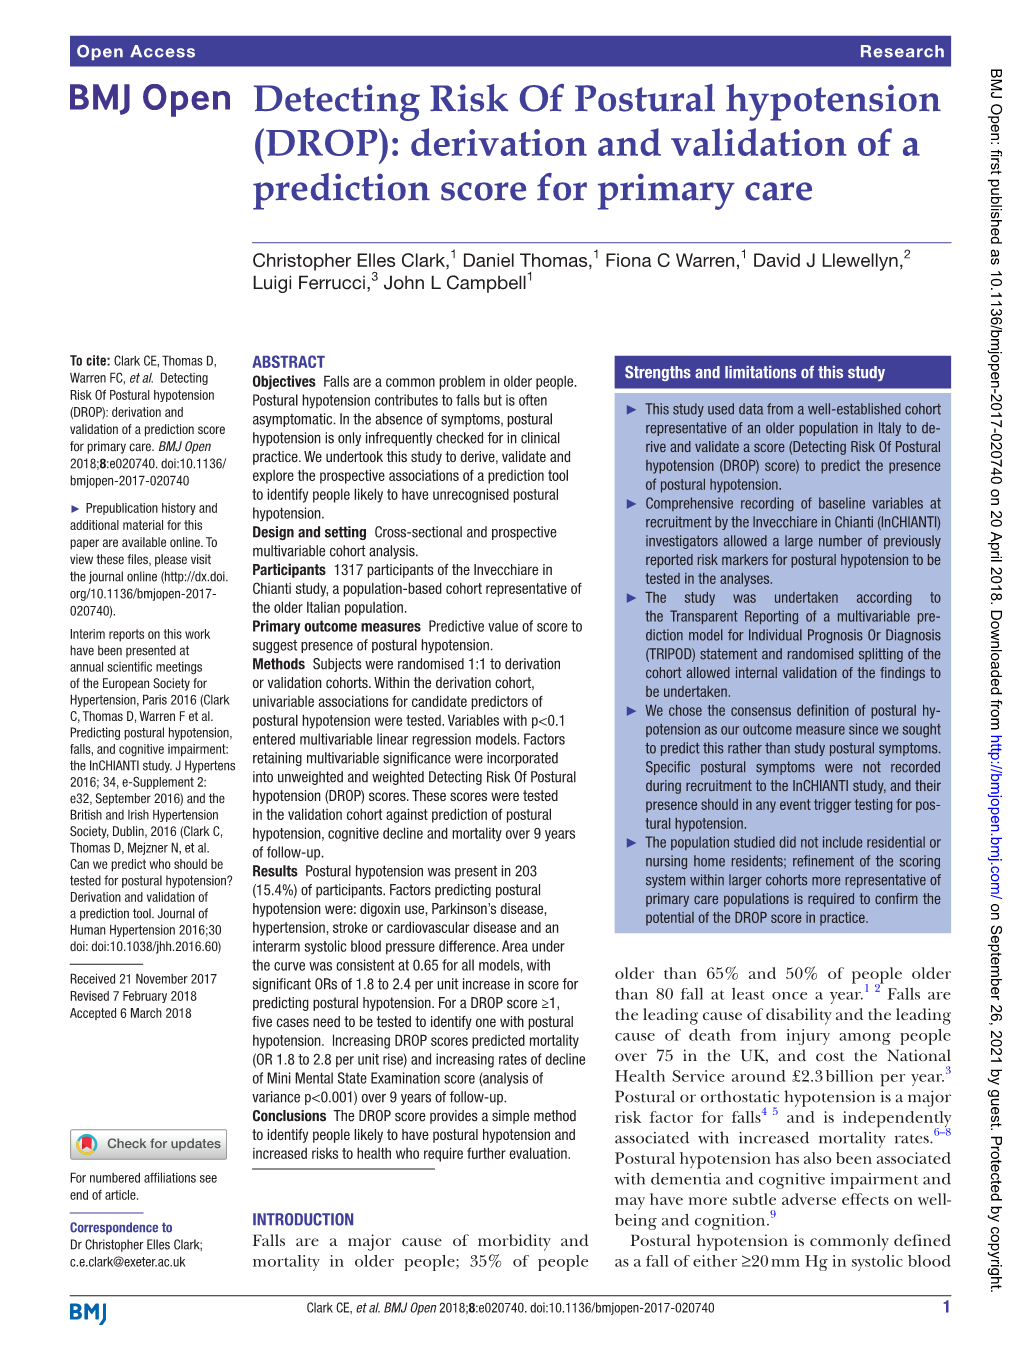 Detecting Risk of Postural Hypotension (DROP): Derivation and Validation of a Prediction Score for Primary Care